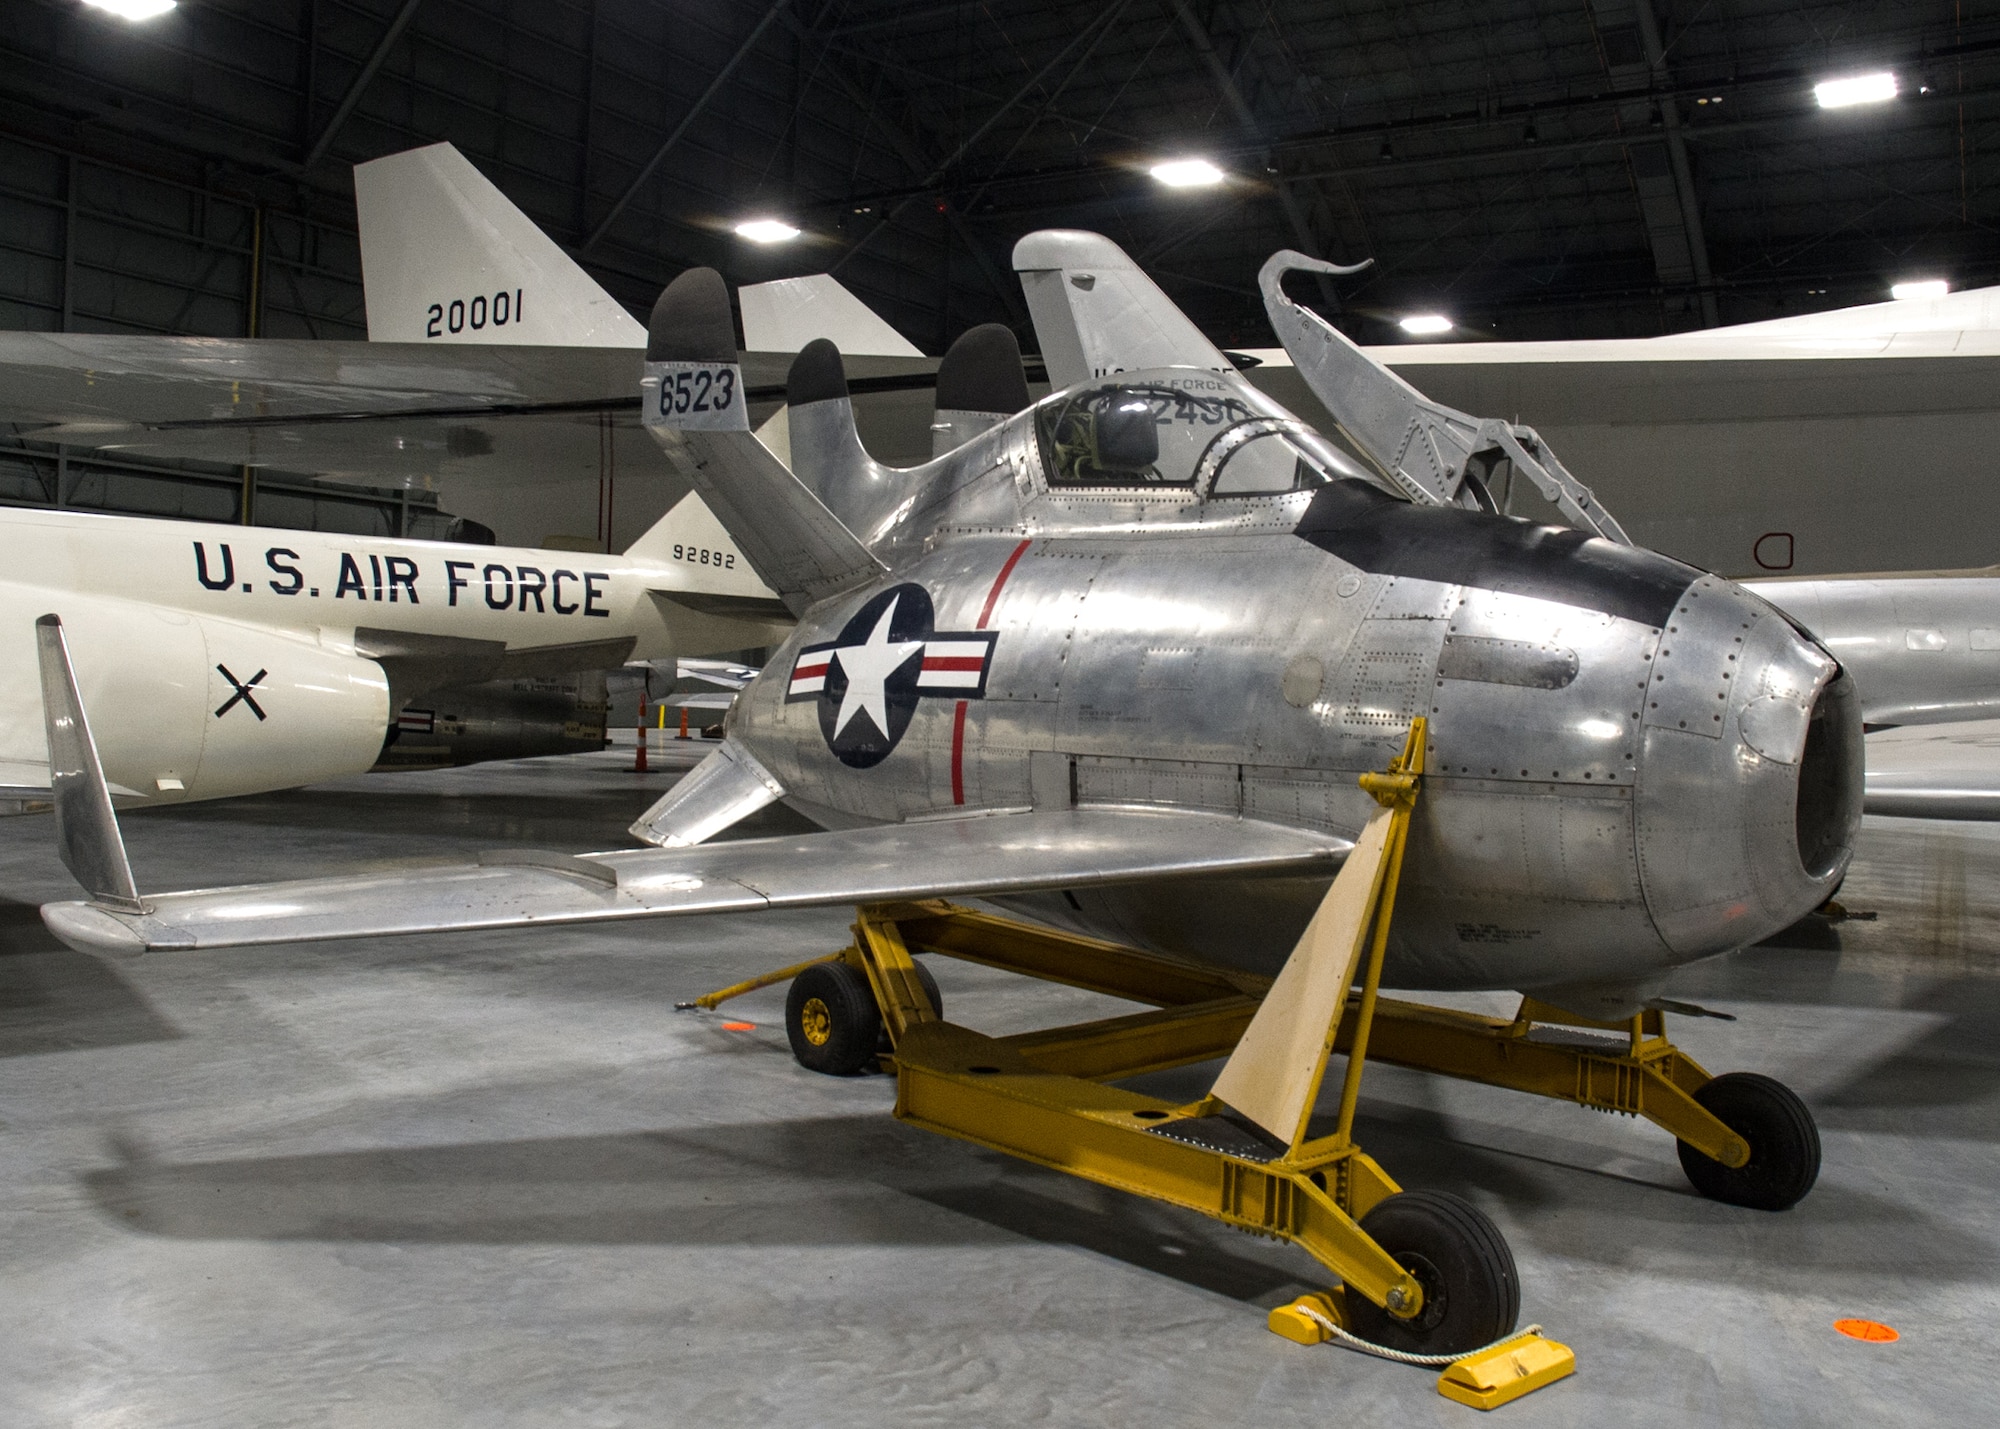 McDonnell XF-85 Goblin in the R&D Gallery at the National Museum of the U.S. Air Force on December 28, 2015. (U.S. Air Force photo)